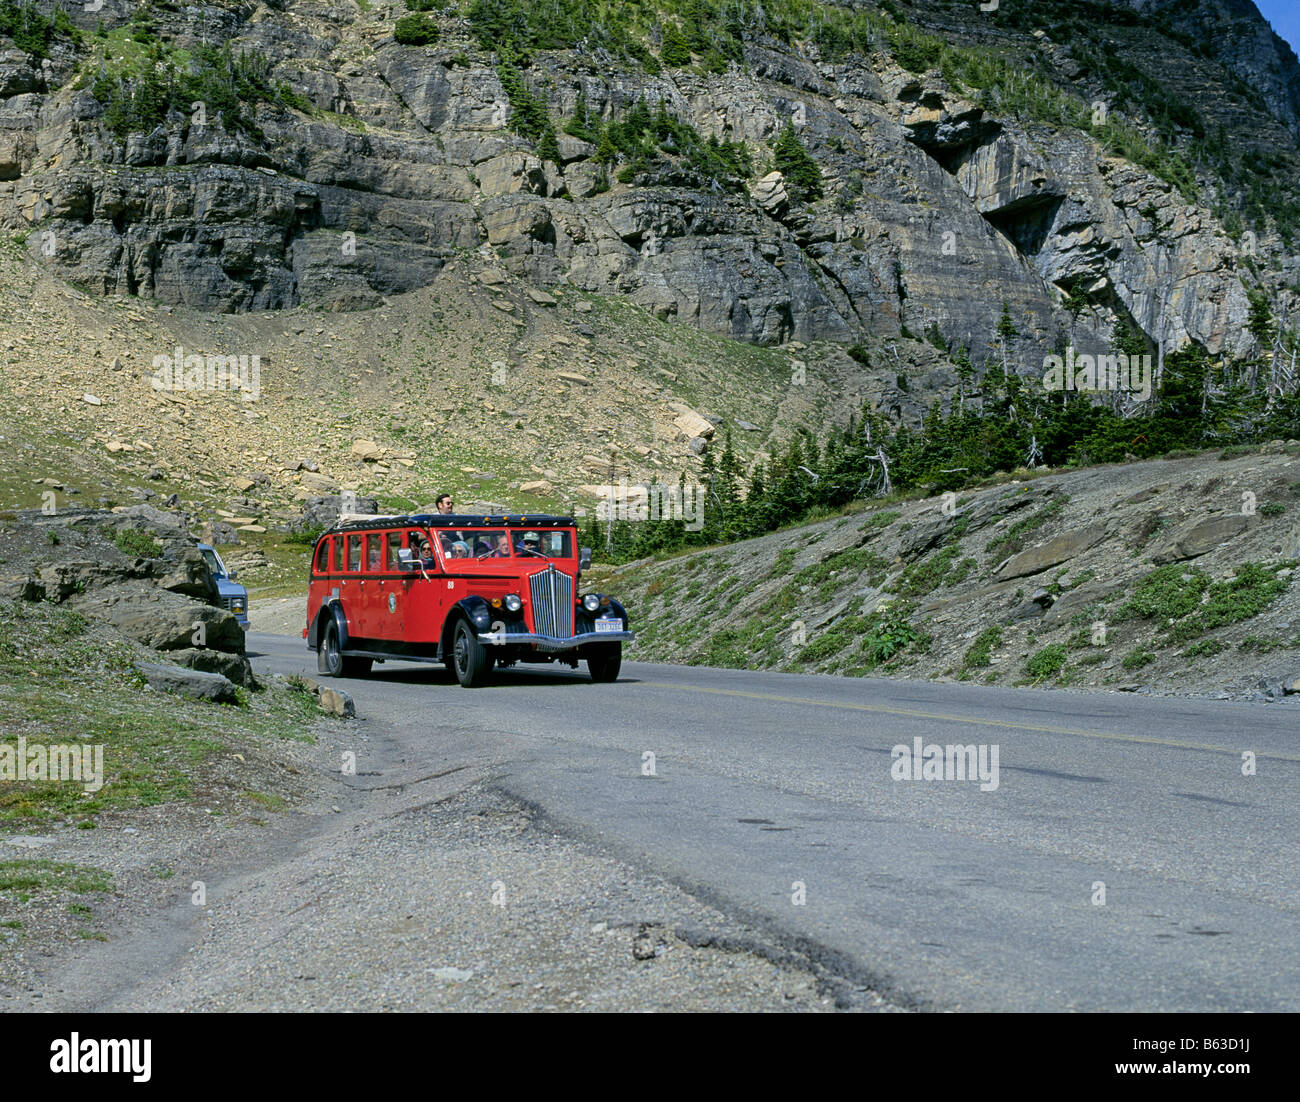 A white Motor Company Red Bus carries passengers on a tour of Going To The Sun Road, Glacier National Park Montana. Stock Photo